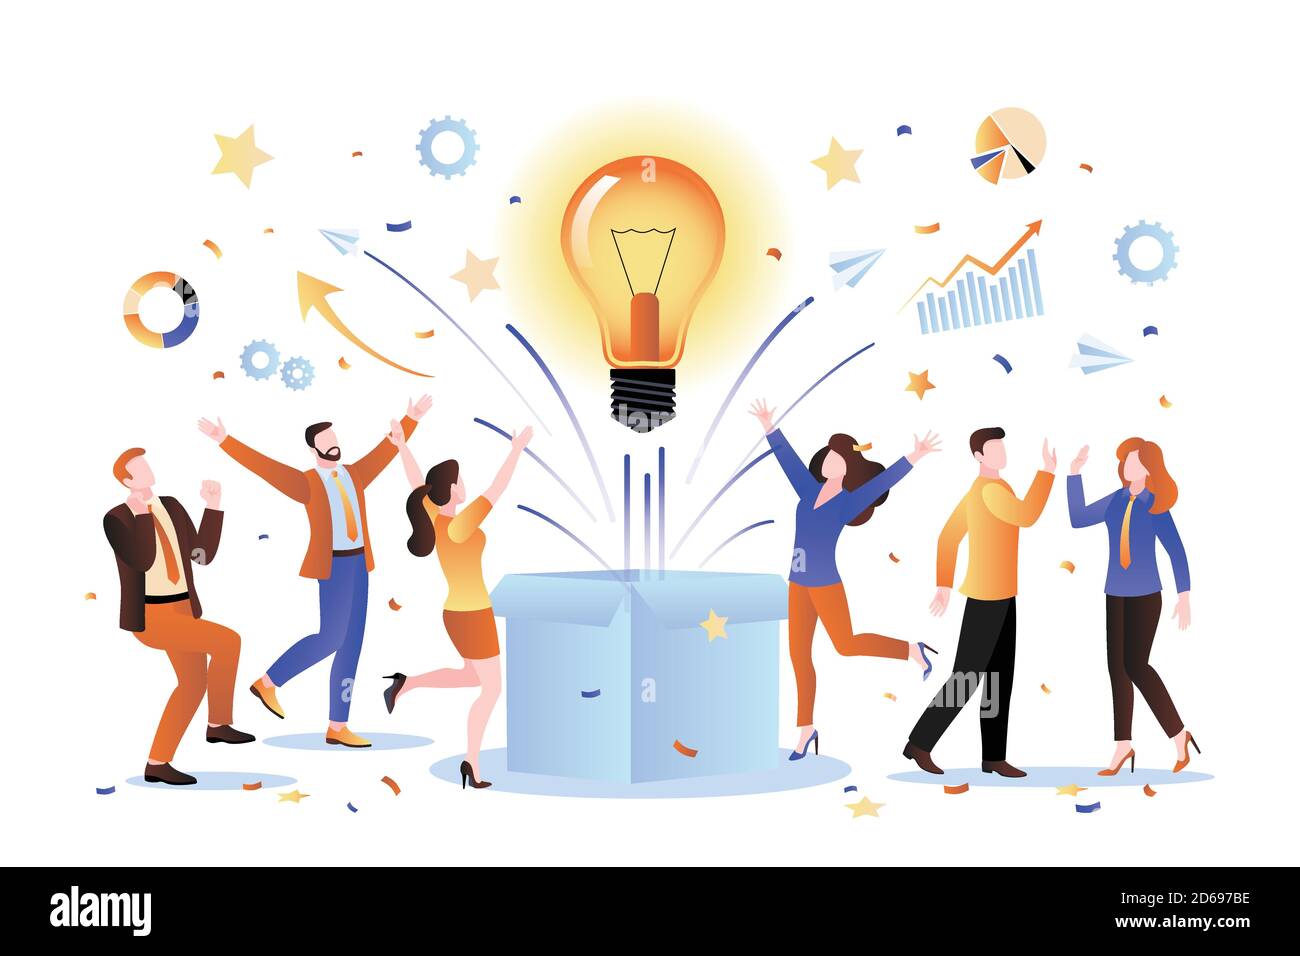 Team idea and business startup concept. Vector flat cartoon illustration. Group of creative people invents innovative successful solution. Stock Vector